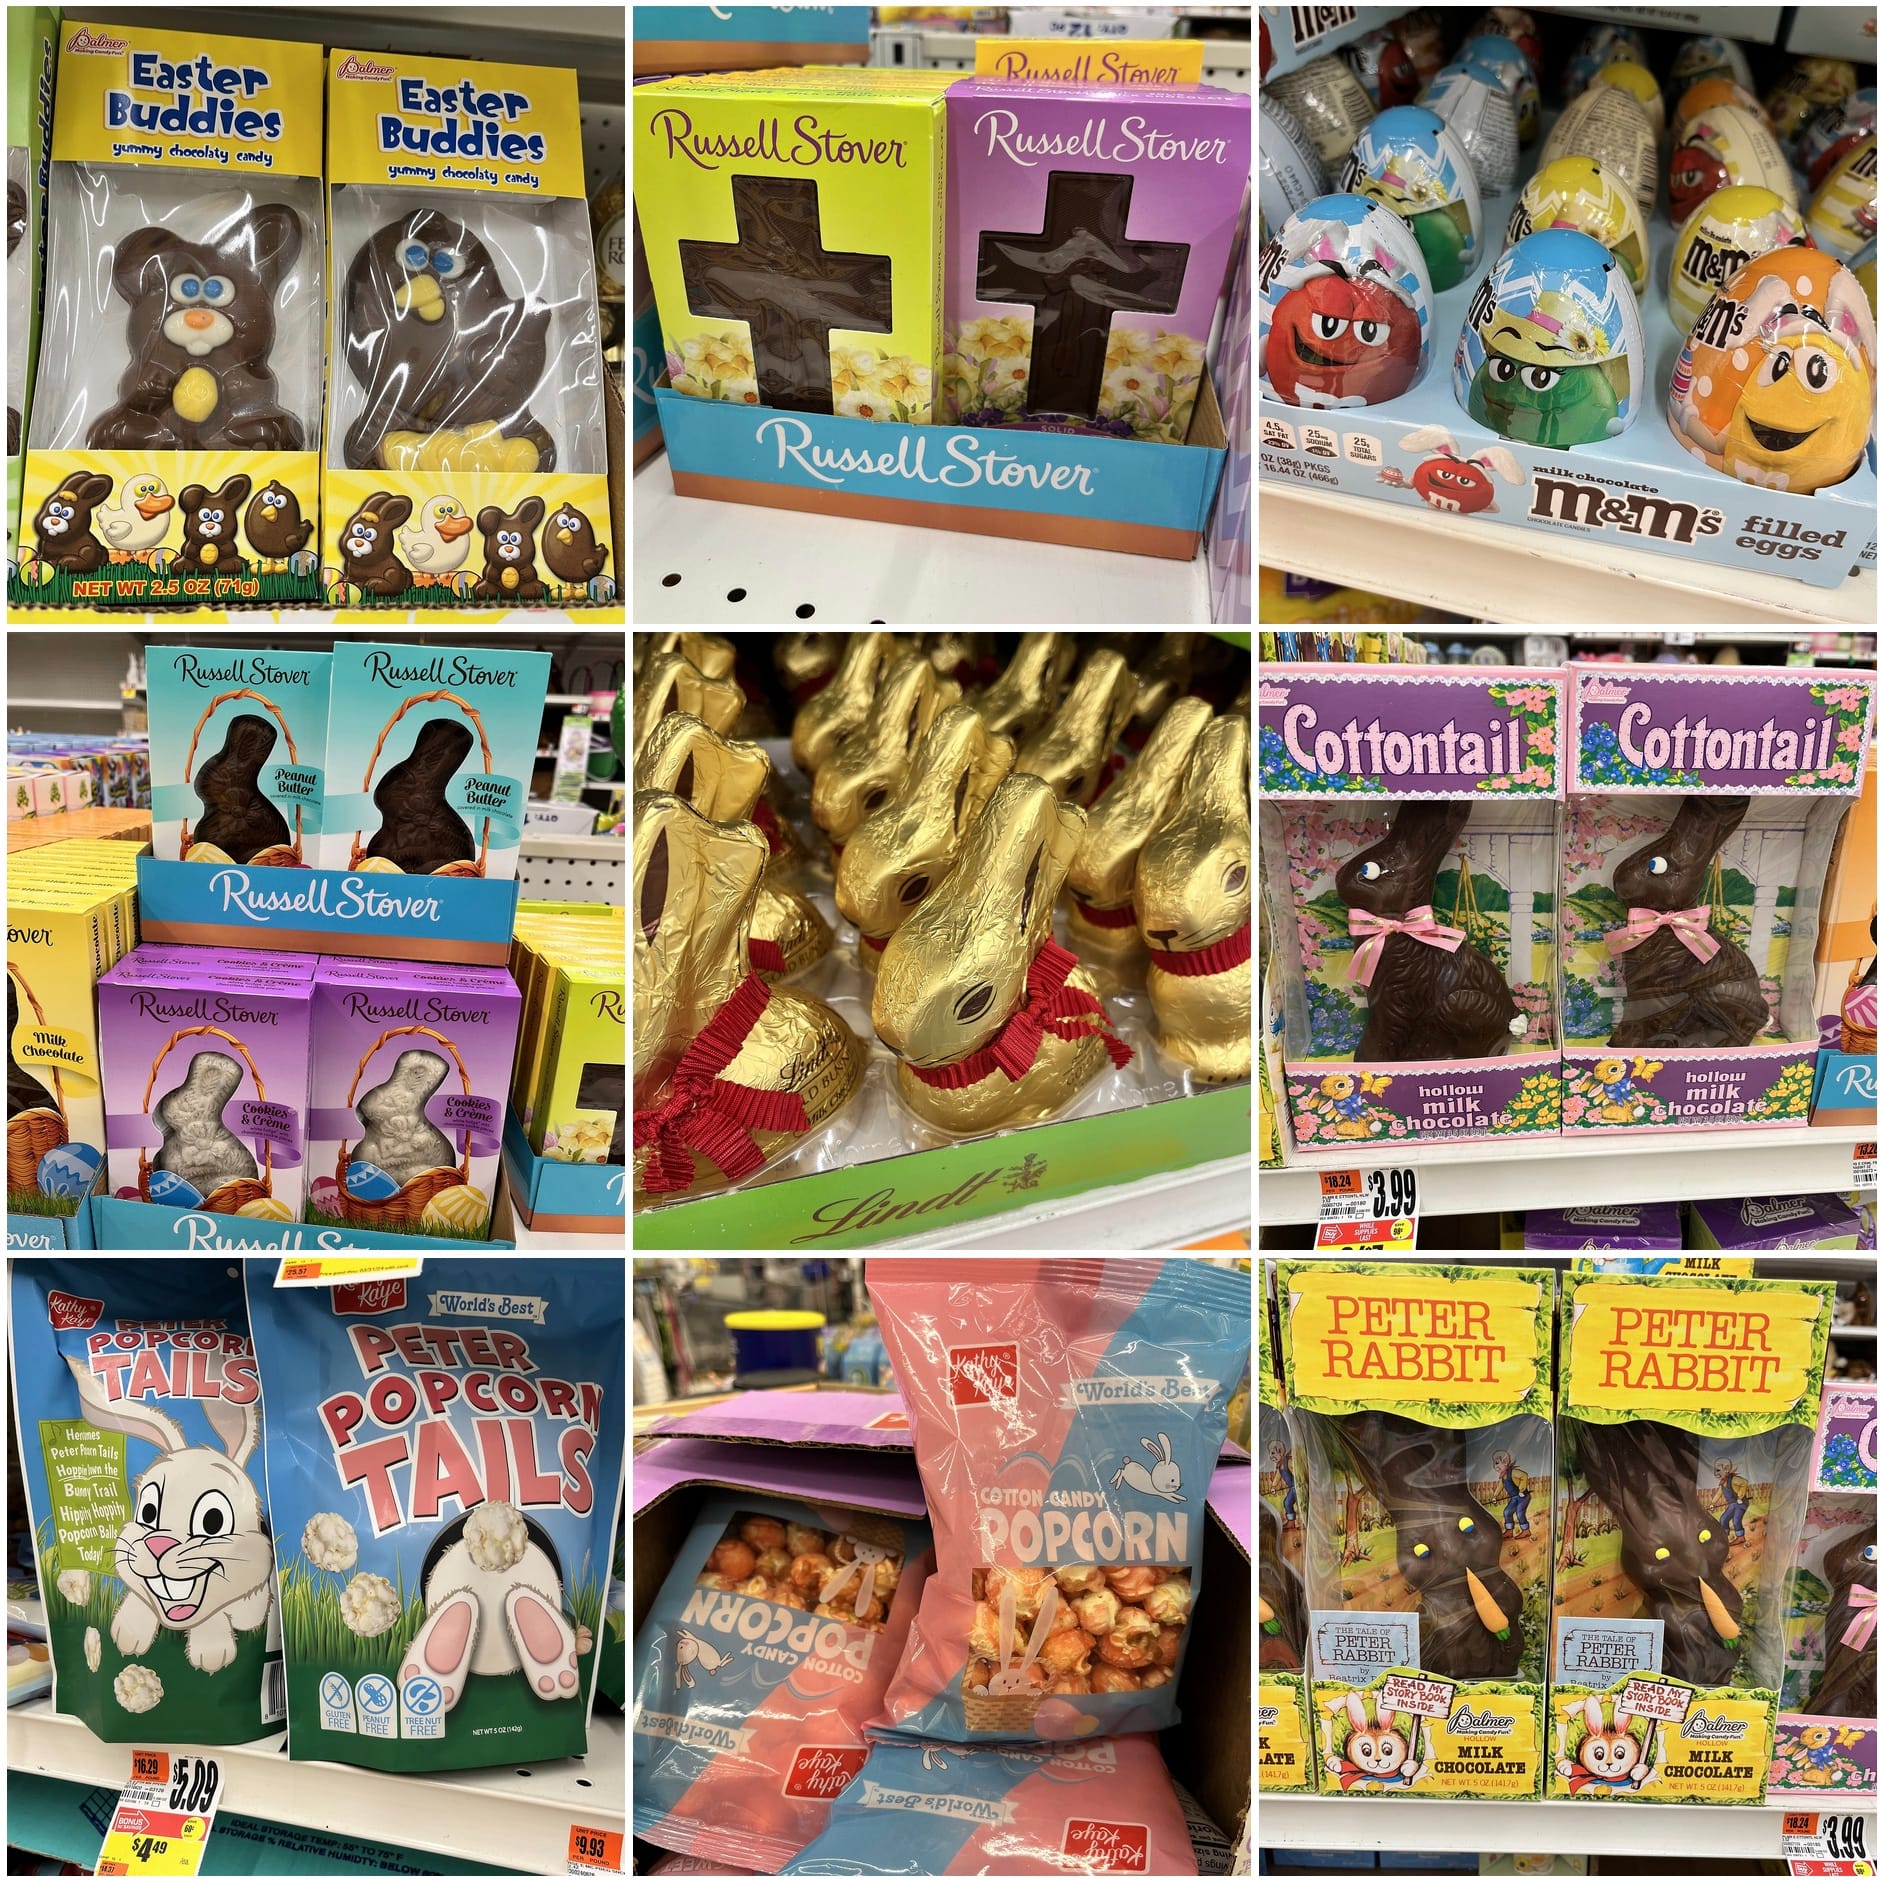 Easter candy: EASTER BUDDIES YUMMY CHOCOLATE CANDY bunny and chick, RUSSELL STOVER crosses, M&Ms FILLED EGGS large plastic eggs wrapped with images of the M&Ms mascots, RUSSELL STOVER easter bunnies in peanut butter and cookies & cream varieties, gold foil-wrapped LINDT easter bunnies, classic COTTONTAIL HOLLOW MILK CHOCOLATE bunnies, WORLD'S BEST PETER POPCORN TAILS popcorn balls, KATHY KAYE® COTTON CANDY POPCORN, classic PALMER MAKING CANDY FUN® PETER RABBIT HOLLOW MILK CHOCOLATE bunny, includes THE TALE OF PETER RABBIT BY BEATRIX POTTER